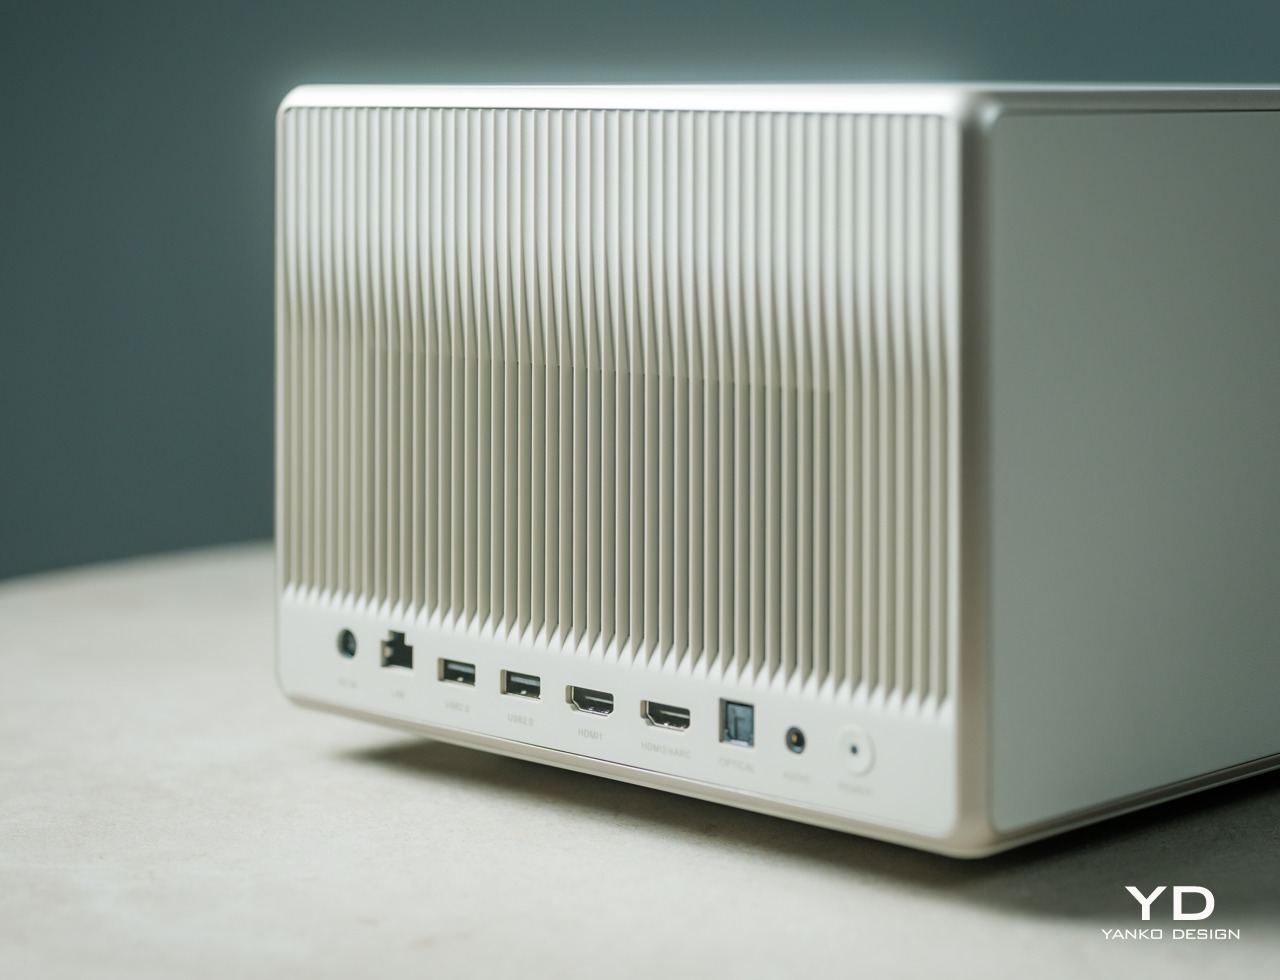 Xgimi Horizon Ultra review: a projector that brings something new to the  table